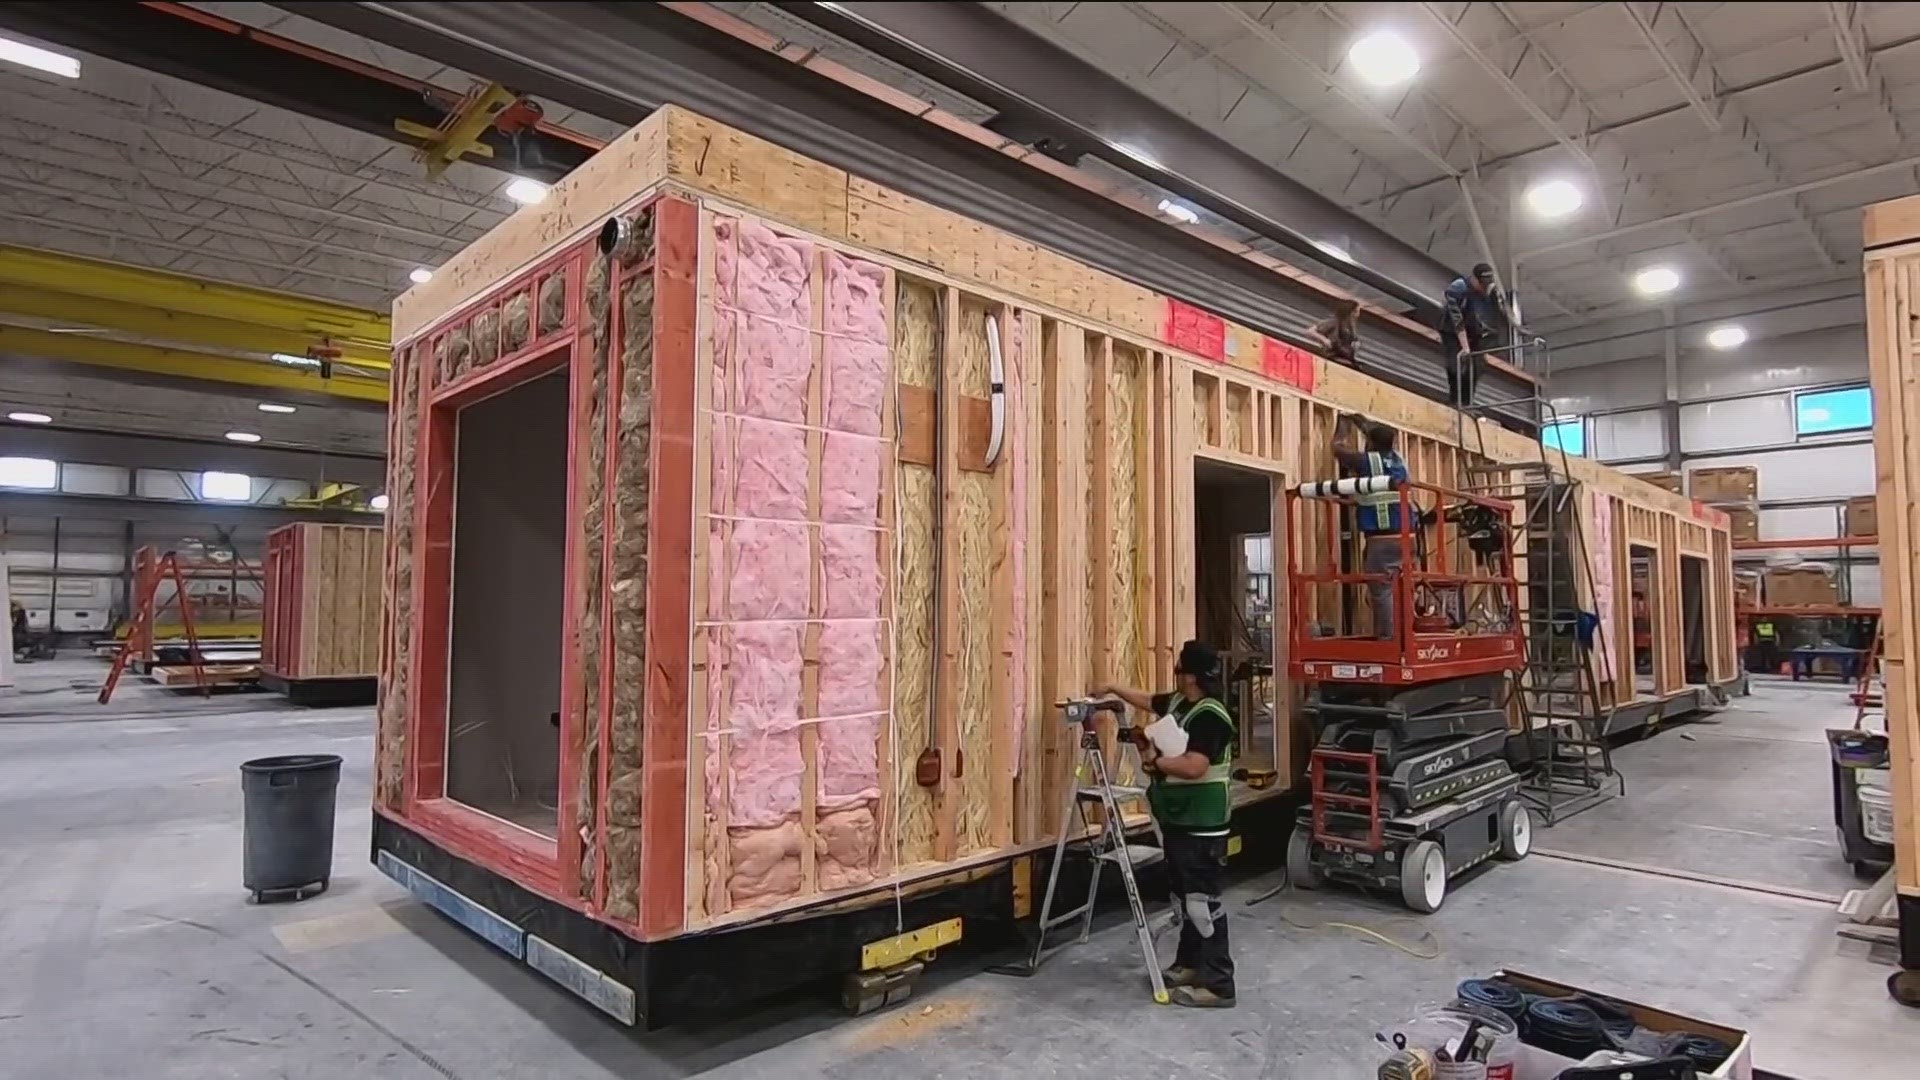 Autovol CEO Rick Murdock said that the construction of modular buildings takes less time.